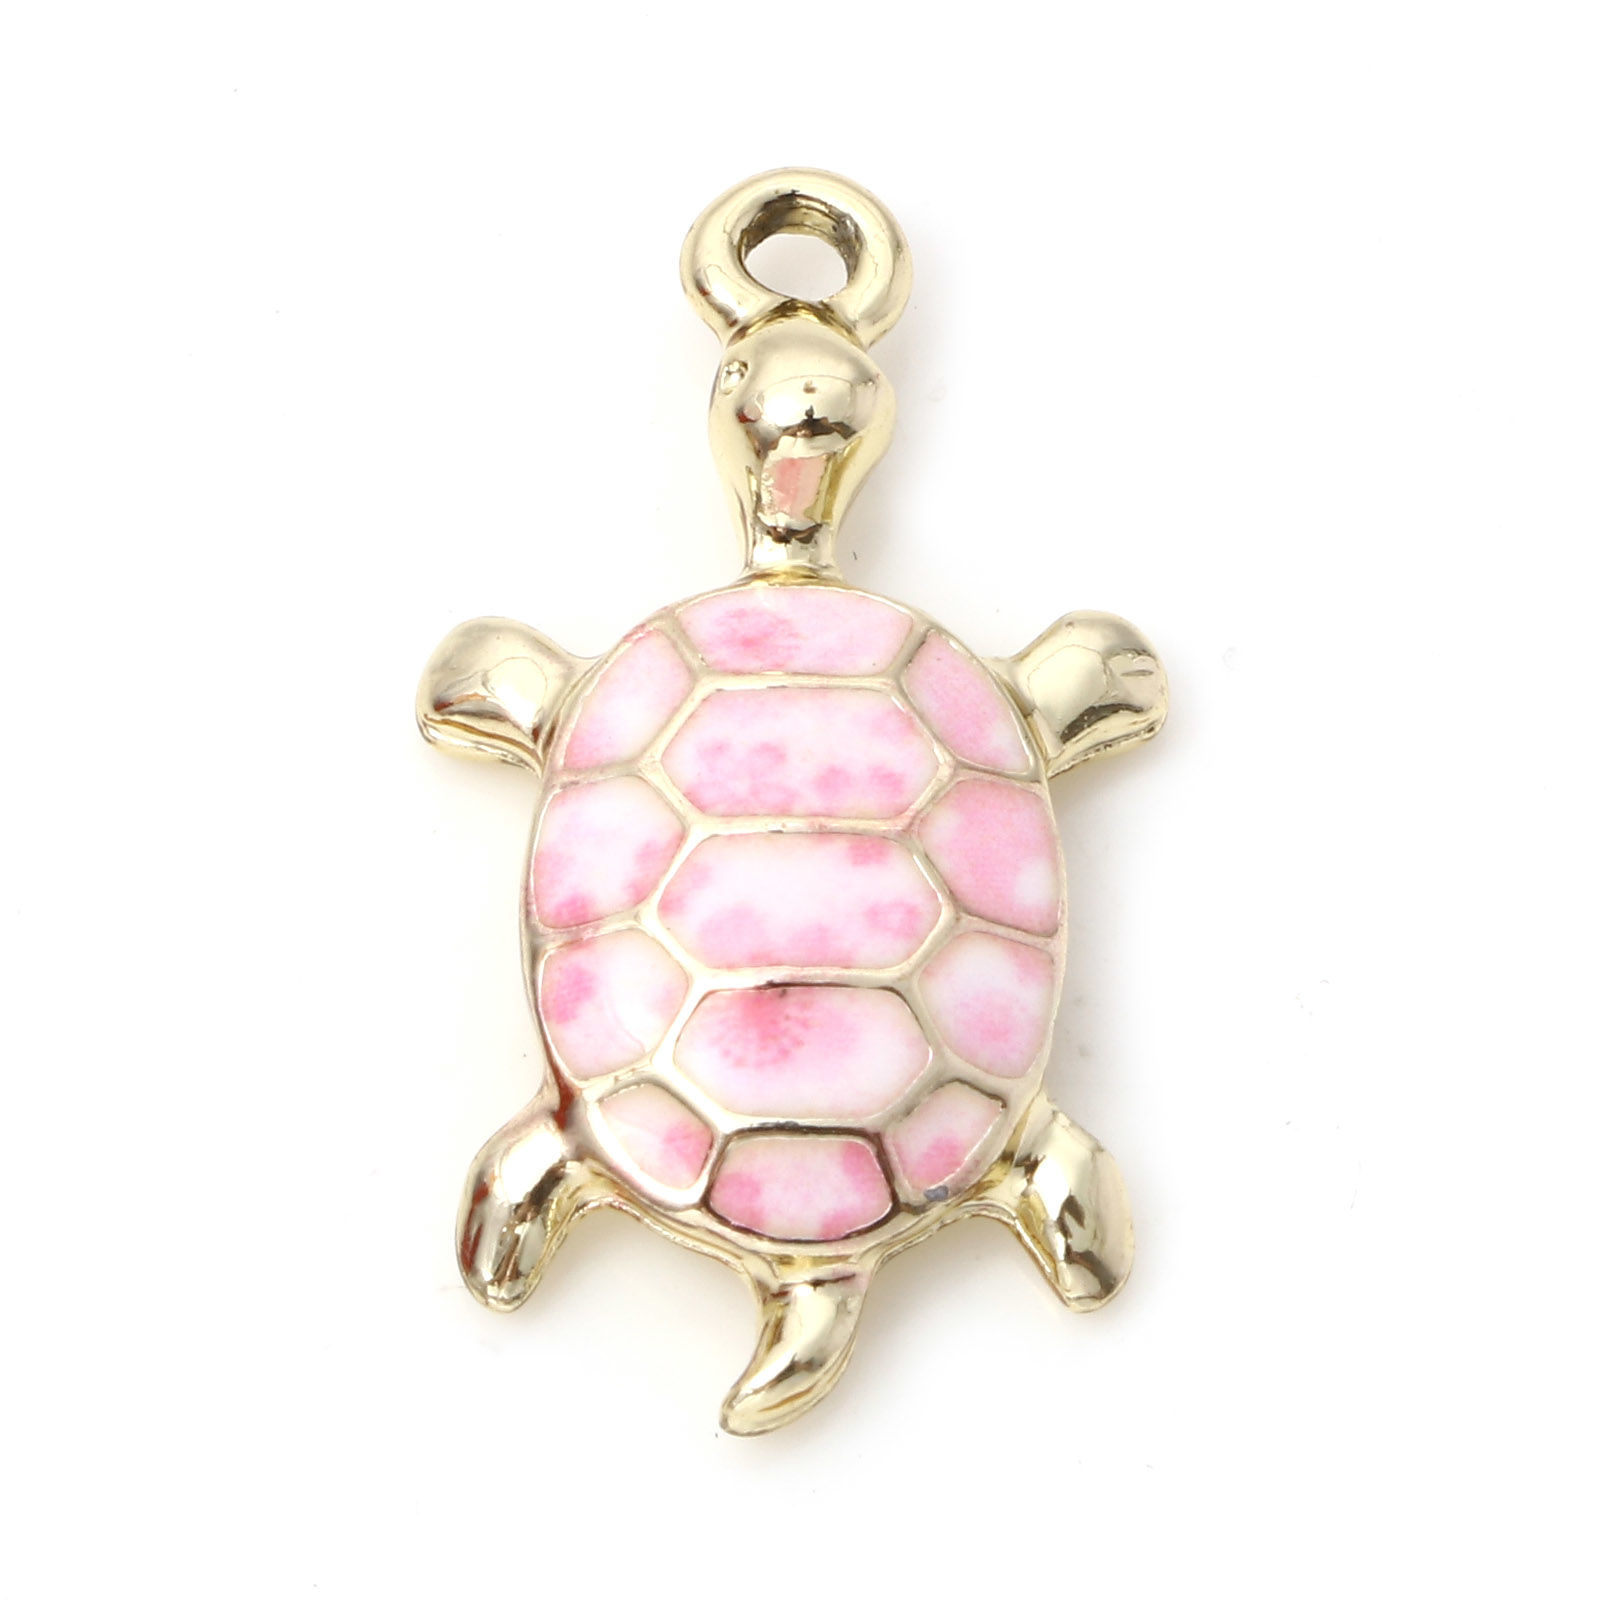 Picture of Zinc Based Alloy Ocean Jewelry Charms Gold Plated Light Pink Sea Turtle Animal Cherry Blossom Sakura Flower Enamel 24mm x 14mm, 10 PCs